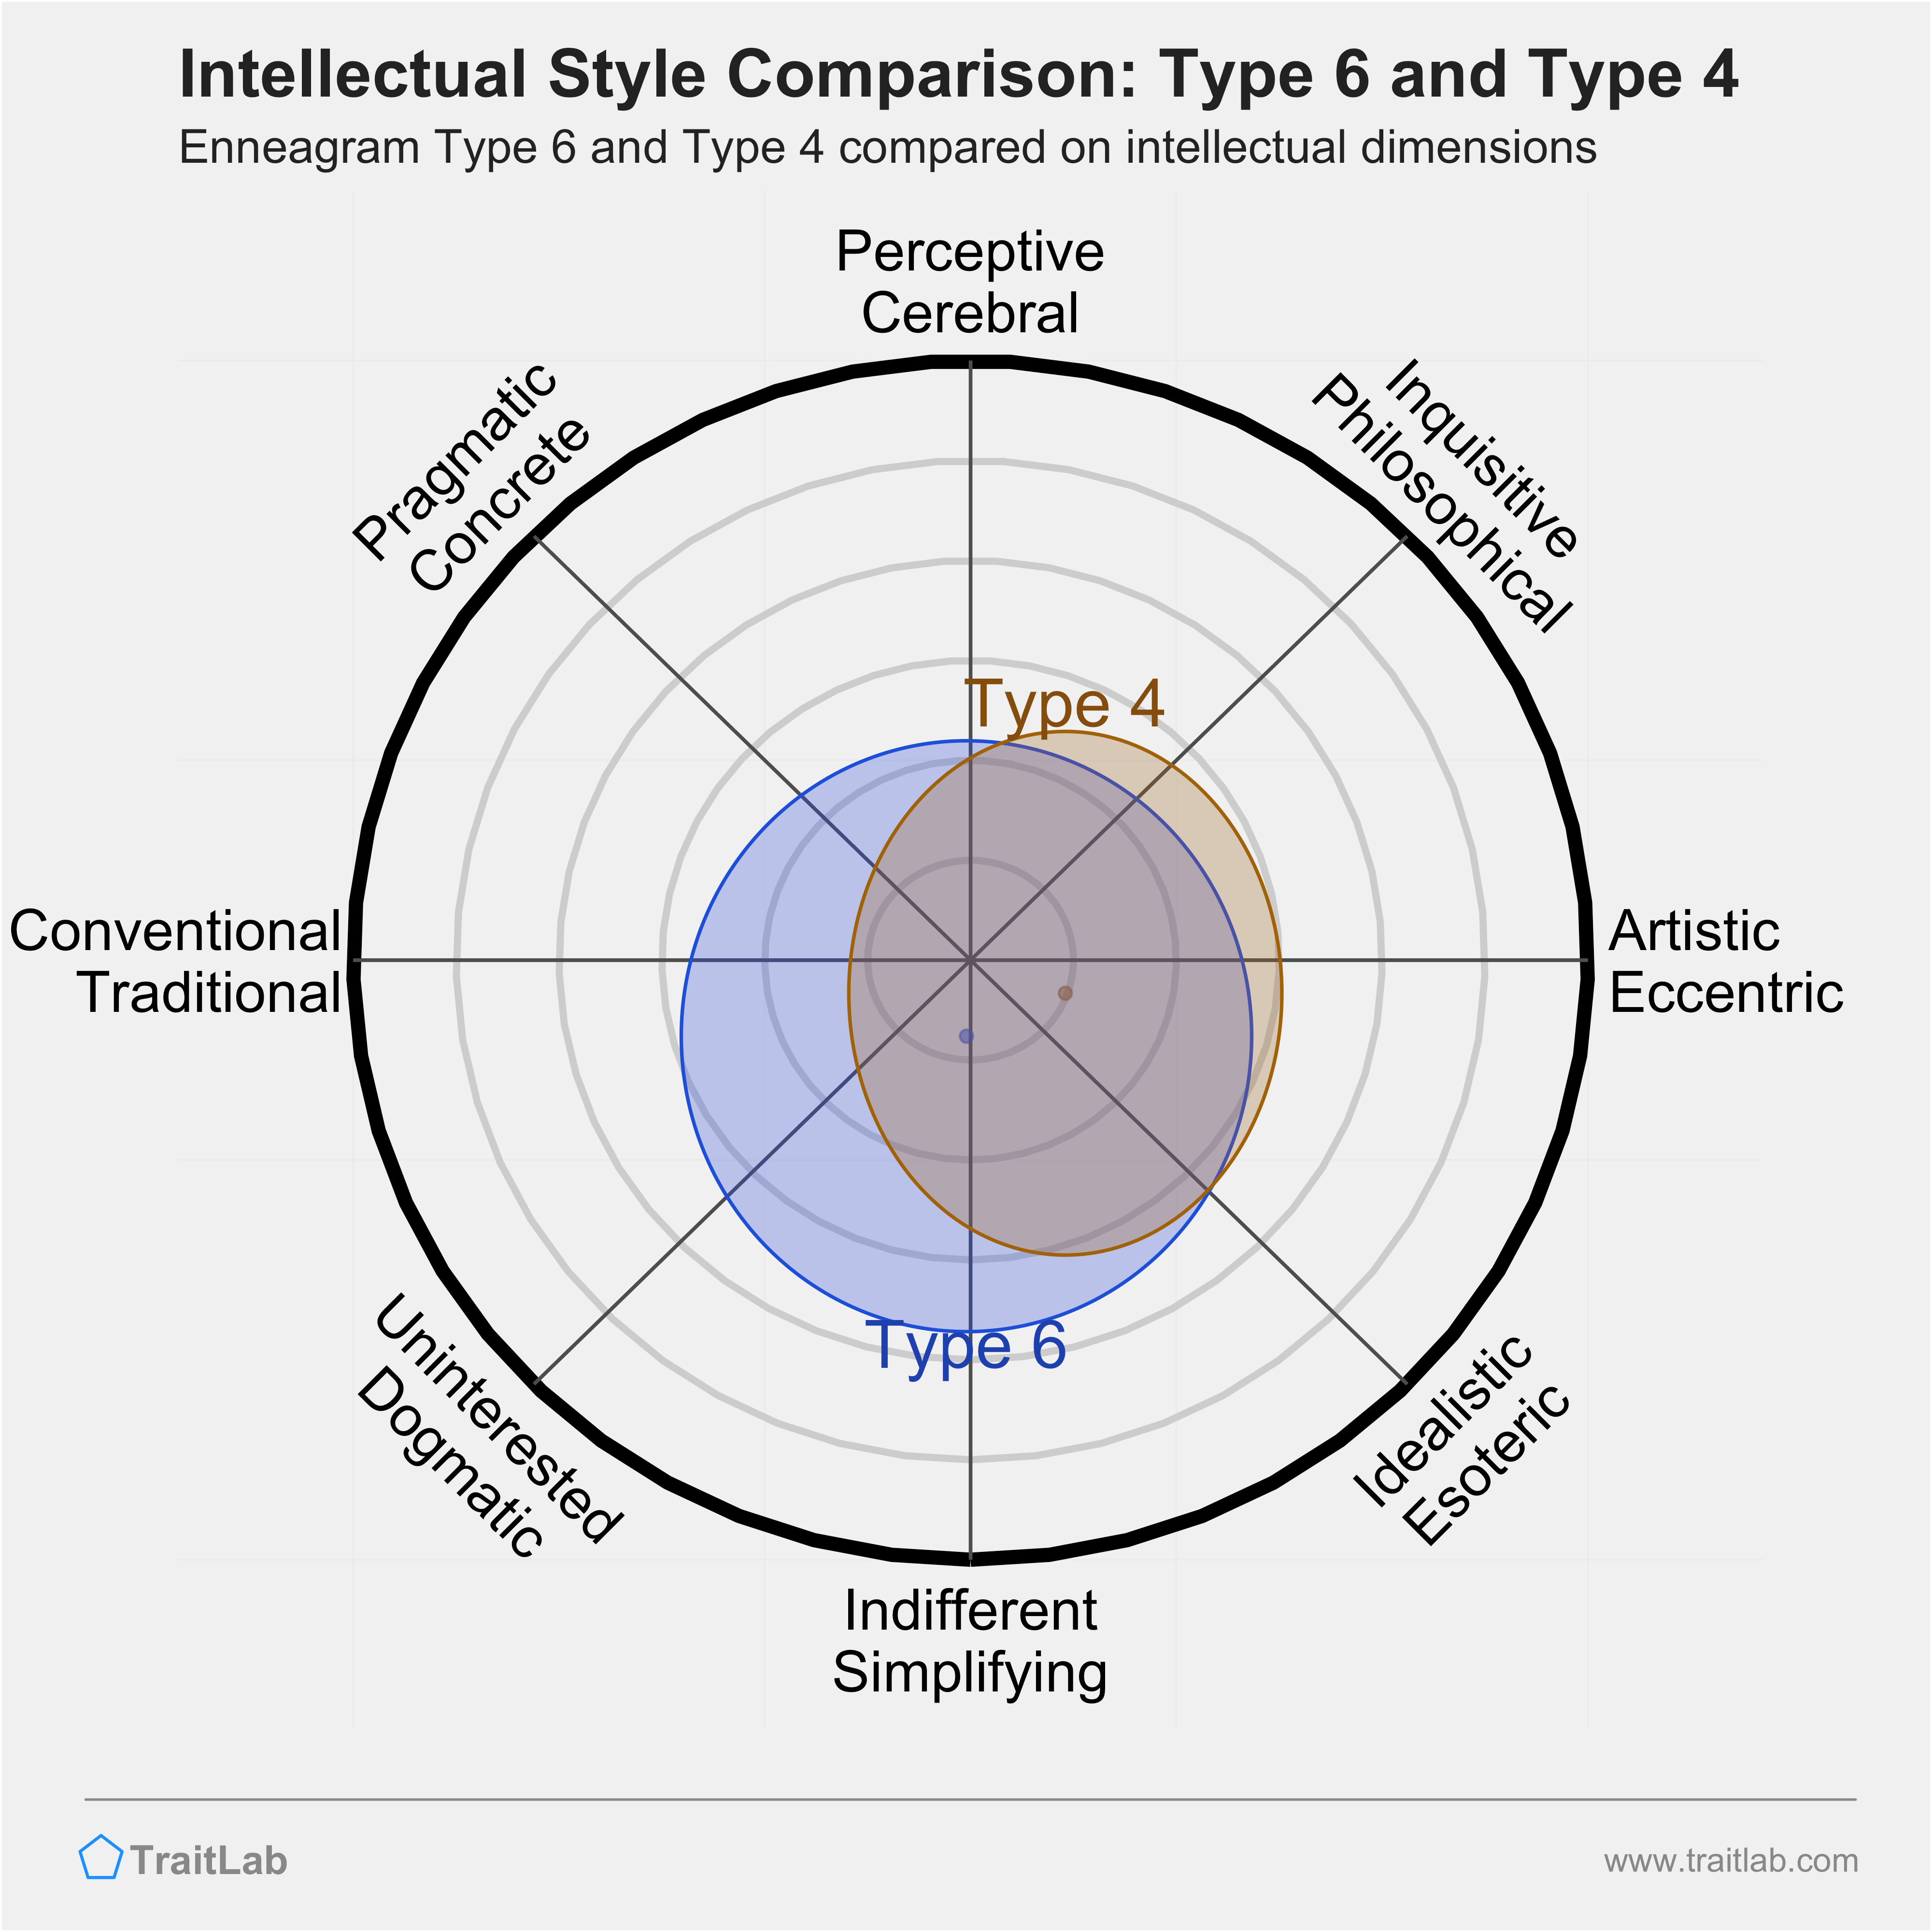 Type 6 and Type 4 comparison across intellectual dimensions